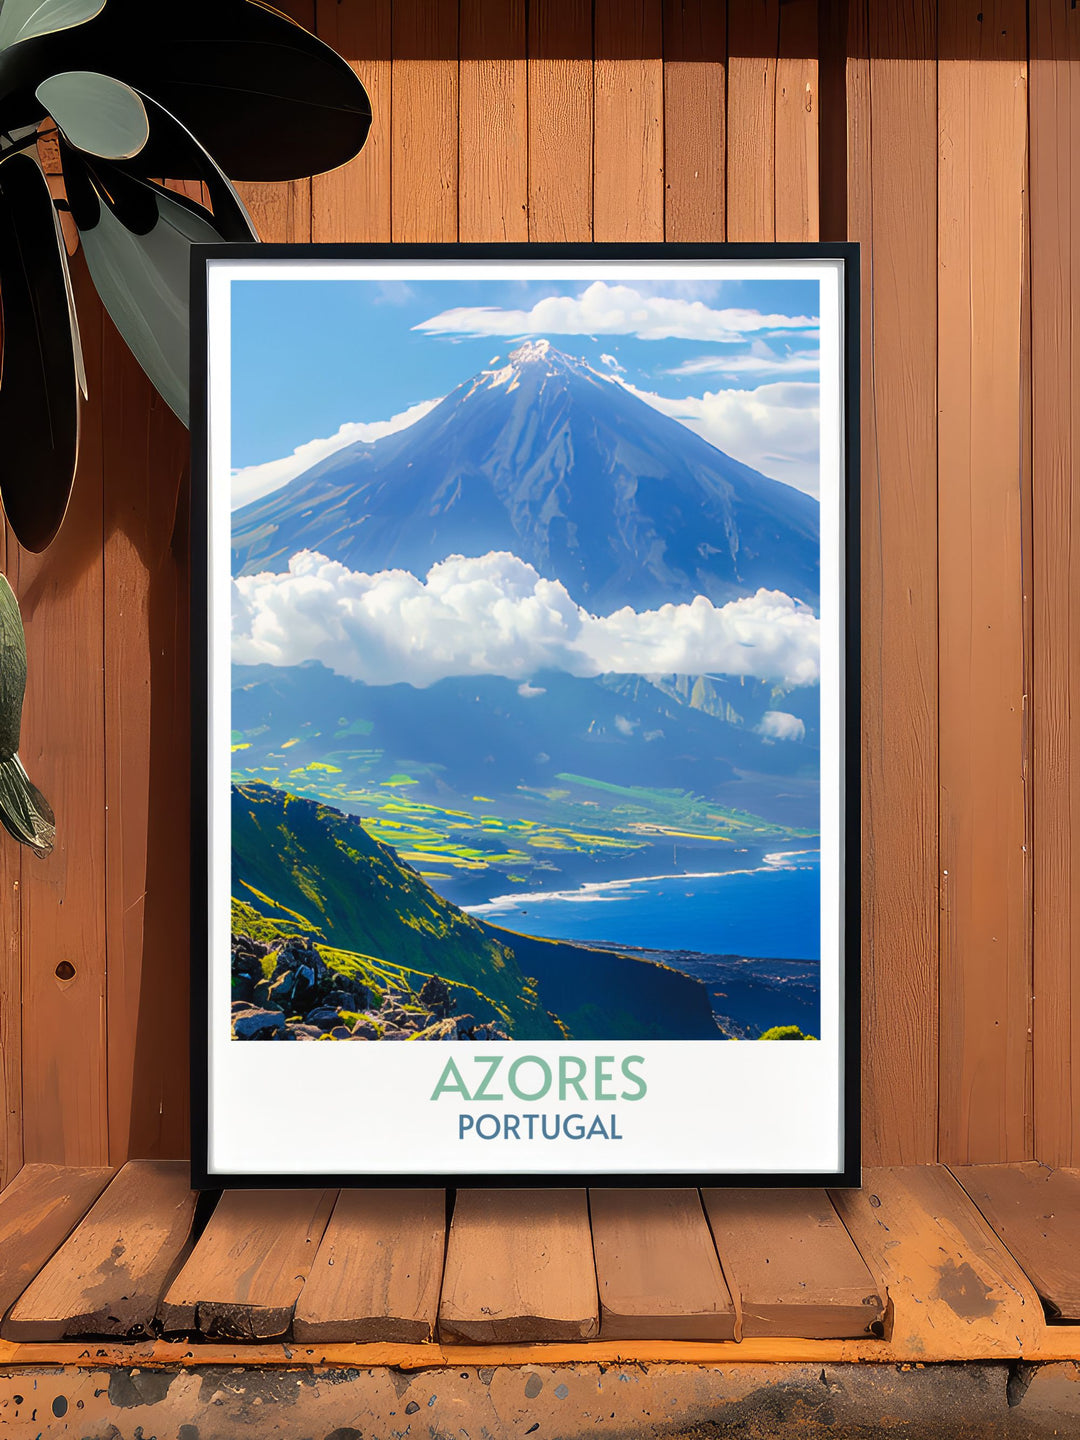 Detailed street map of Azores, focusing on Pico Island and Mount Pico, ideal for celebrating Portuguese heritage through wall art.